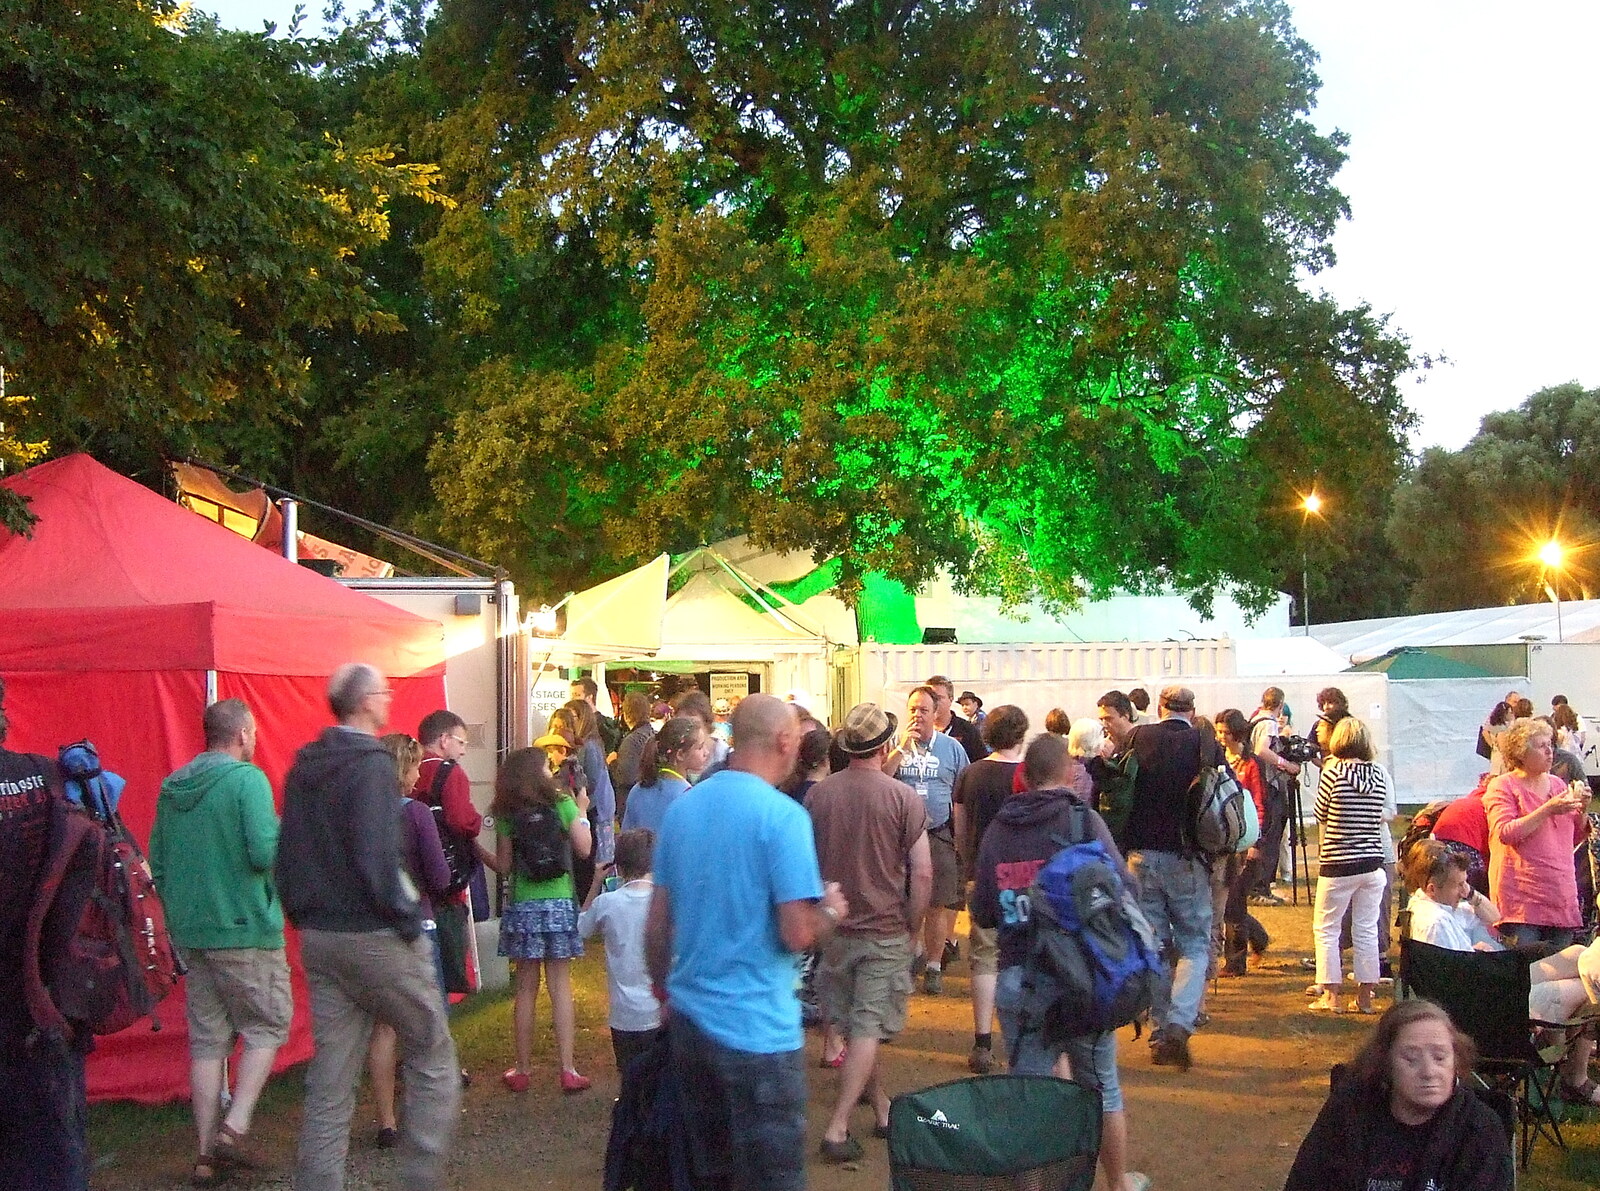 Some trees are lit up with green light from The Cambridge Folk Festival, Cherry Hinton, Cambridge - 28th July 2012